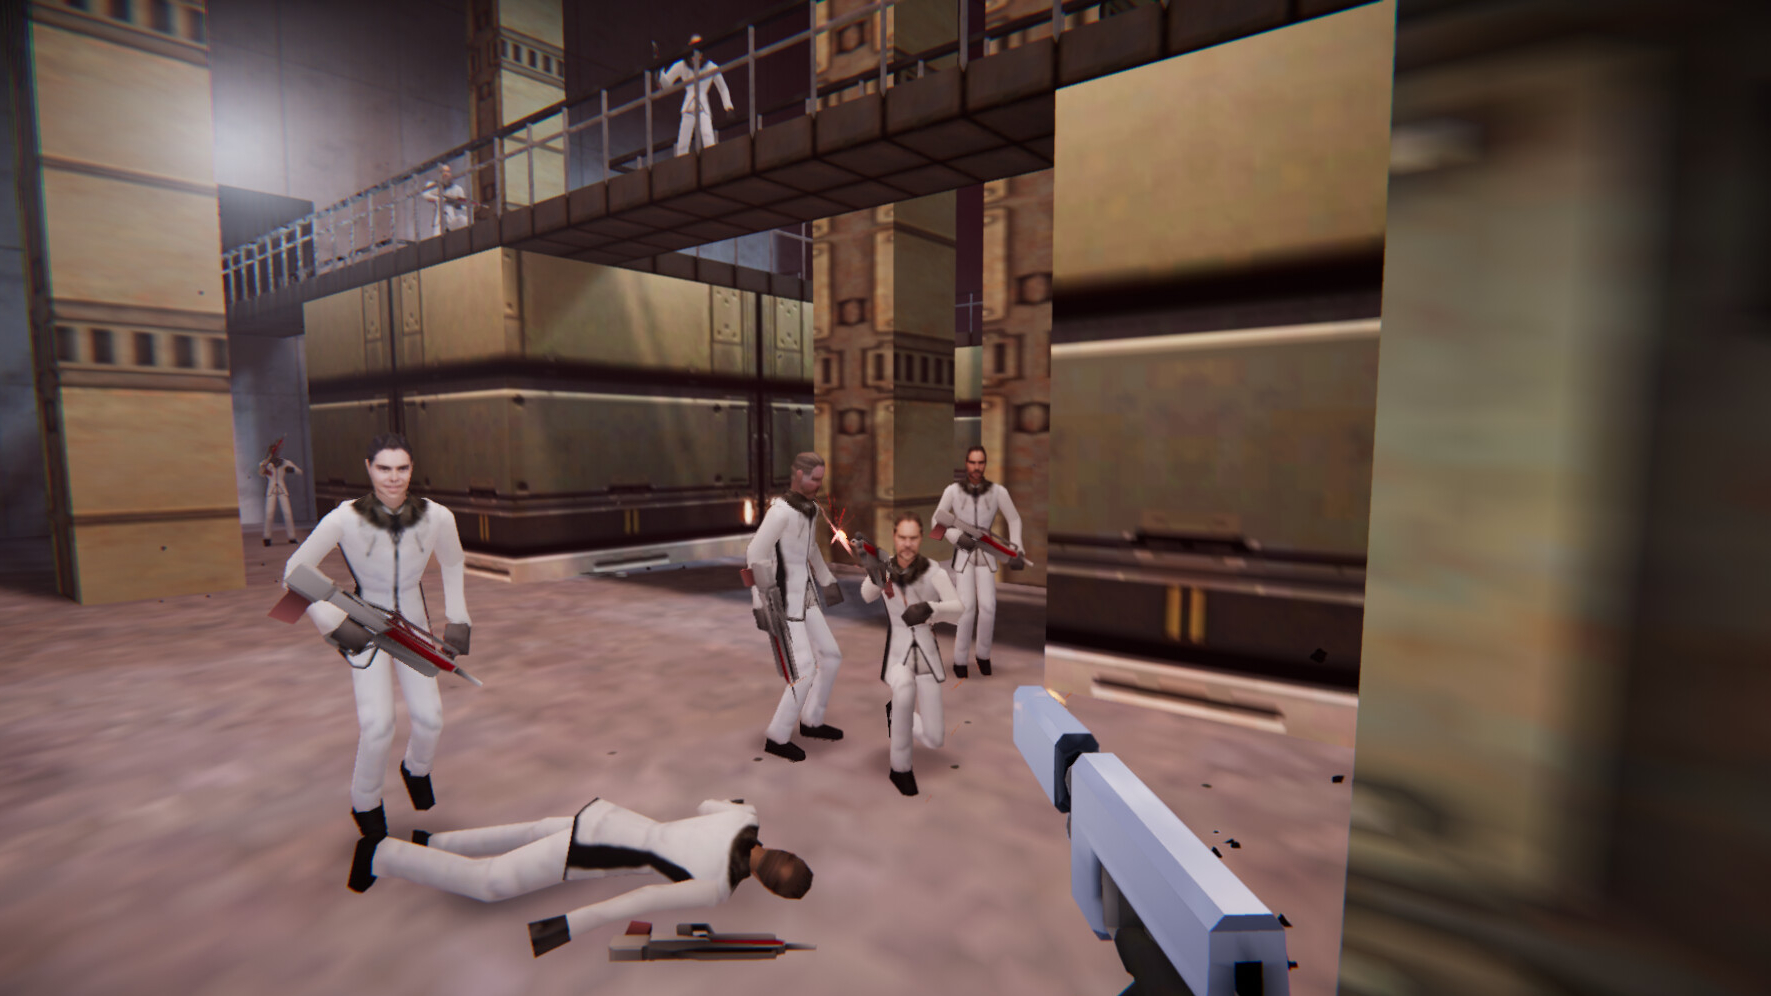 GoldenEye 007 fans finally have a new FPS to look forward to